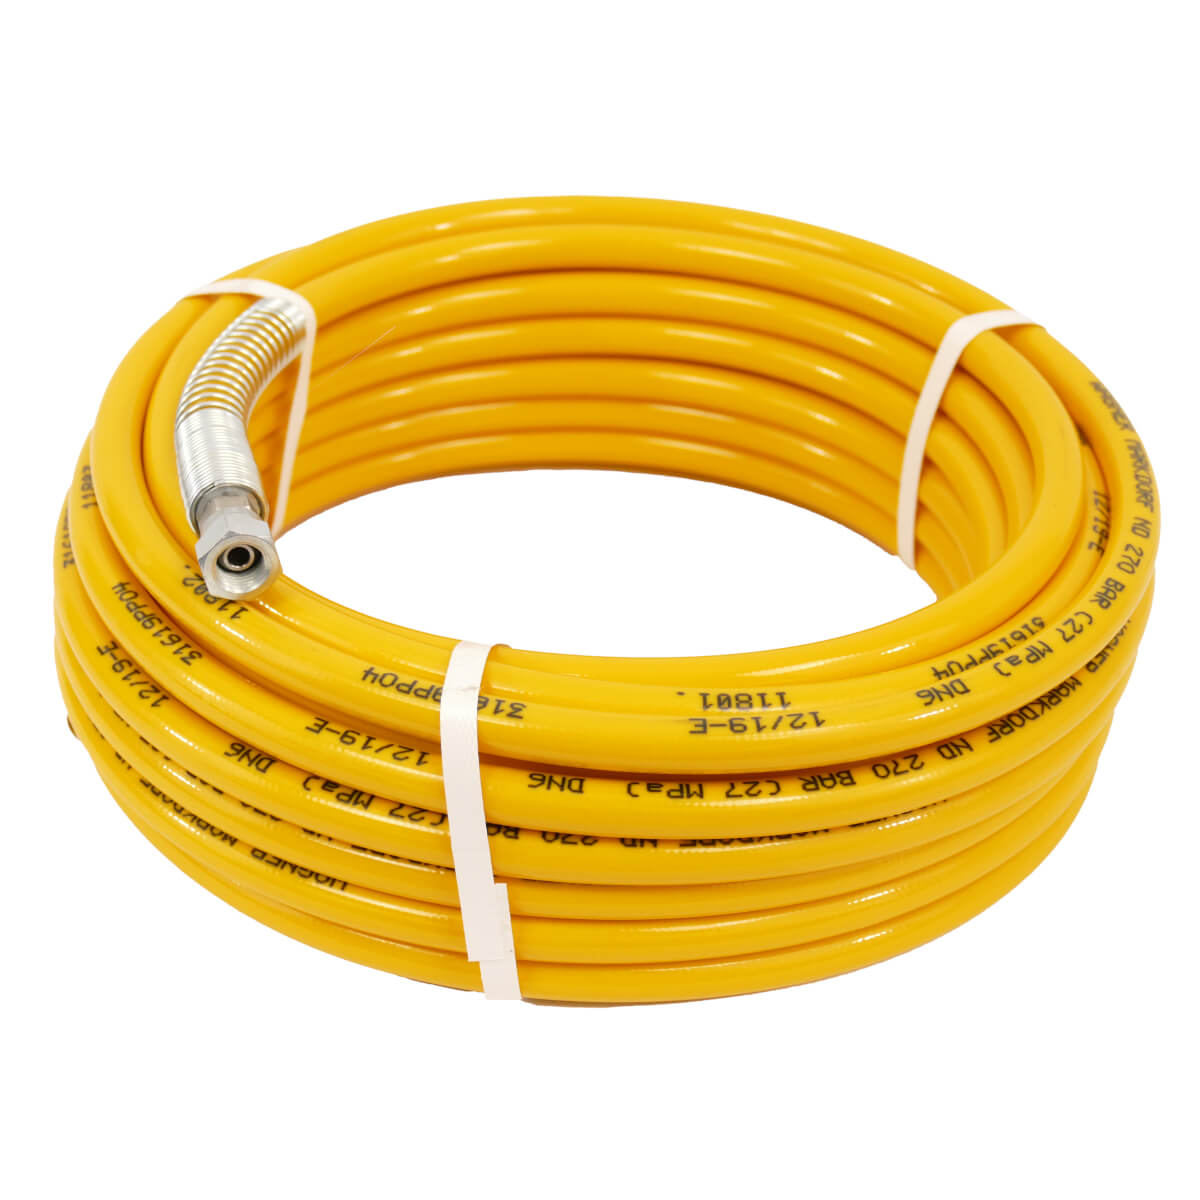 WAGNER HD-Schlauch DN19; max. 25 MPa; NPSM 3/4"; 15 m